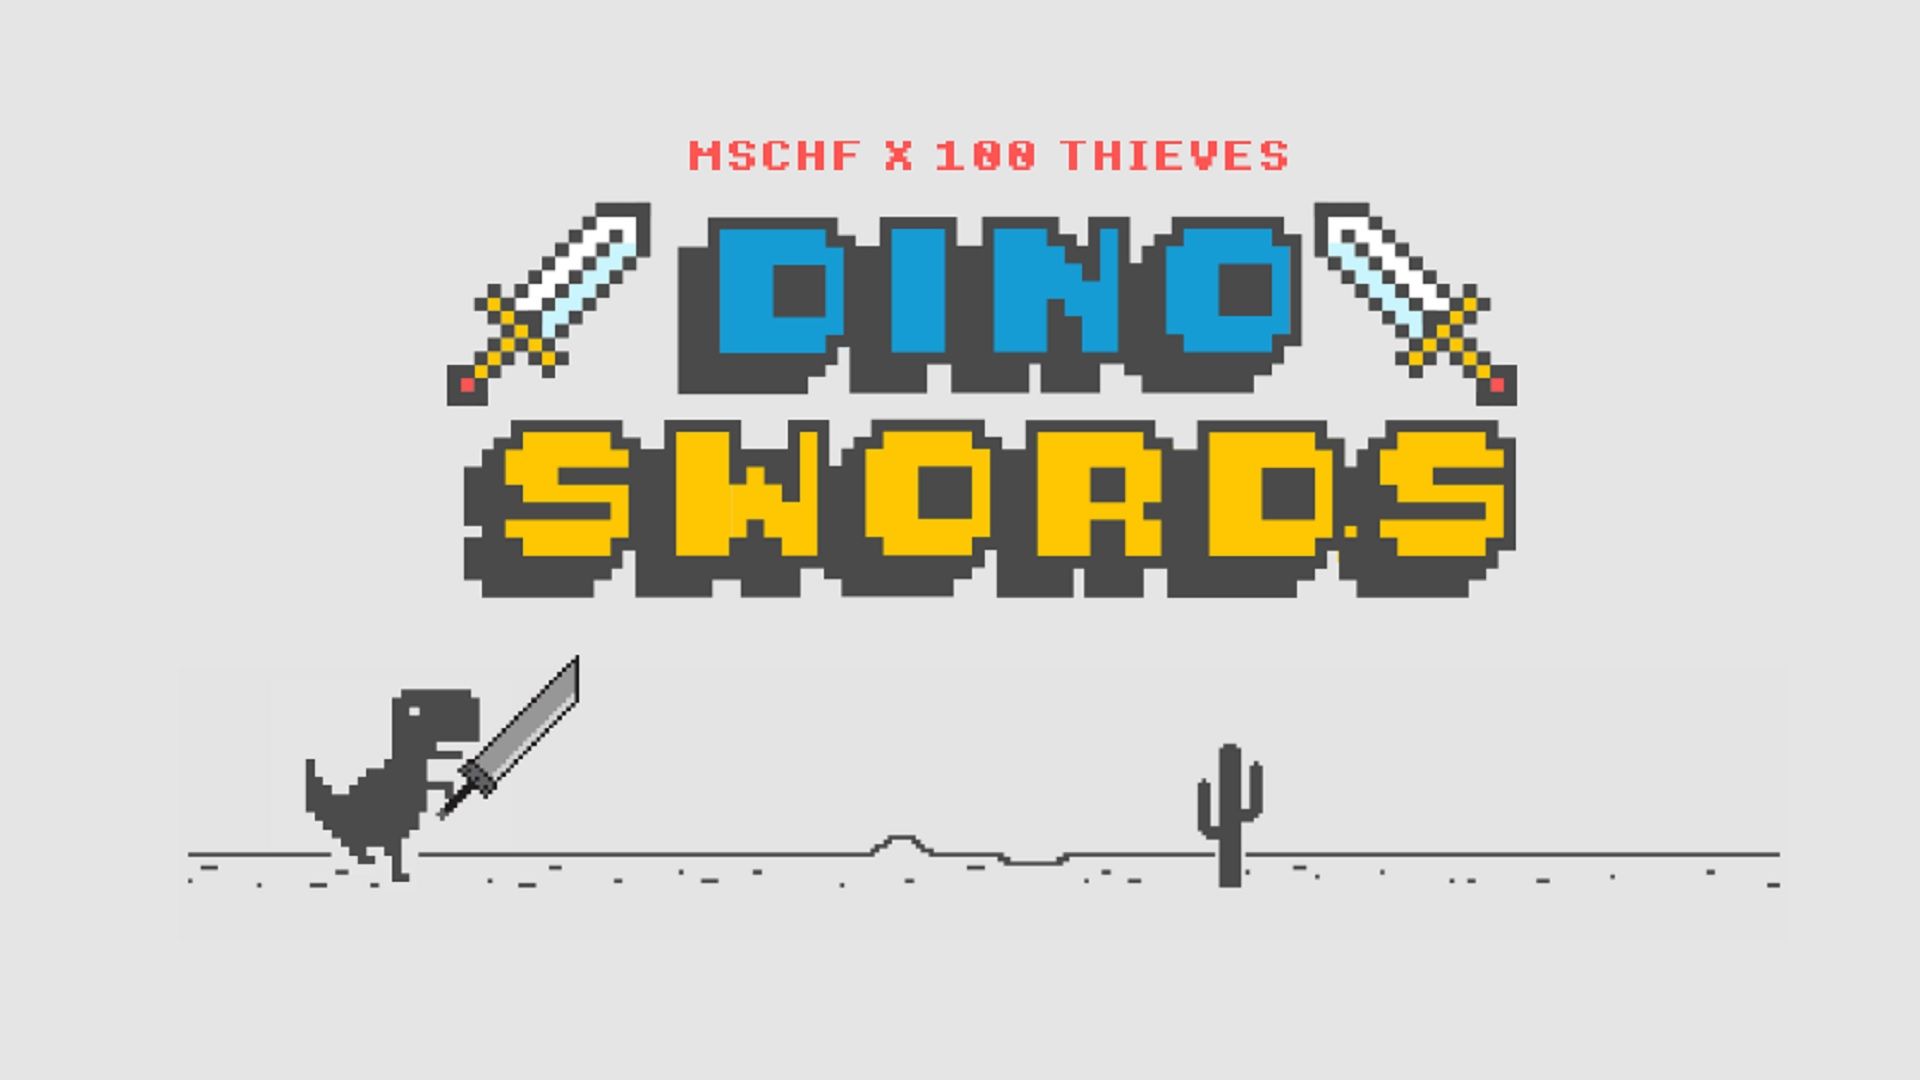 Chrome's Dinosaur game has been upgraded with weapons photo 2